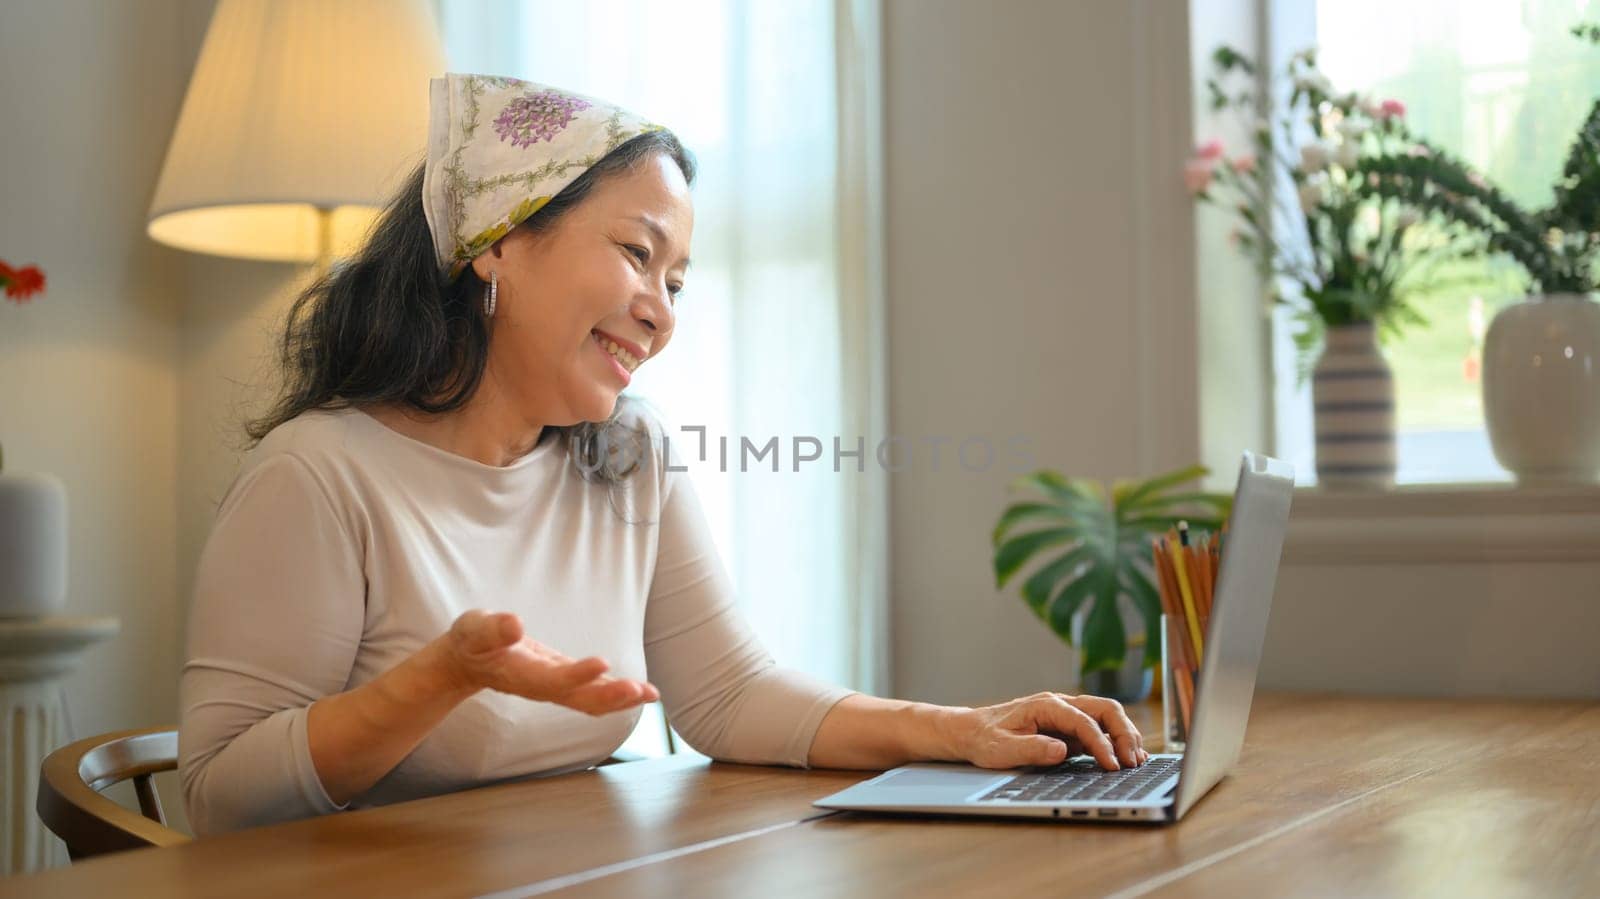 Positive stylish middle age woman having video call with family or friends on laptop. People, technology and communication concept.